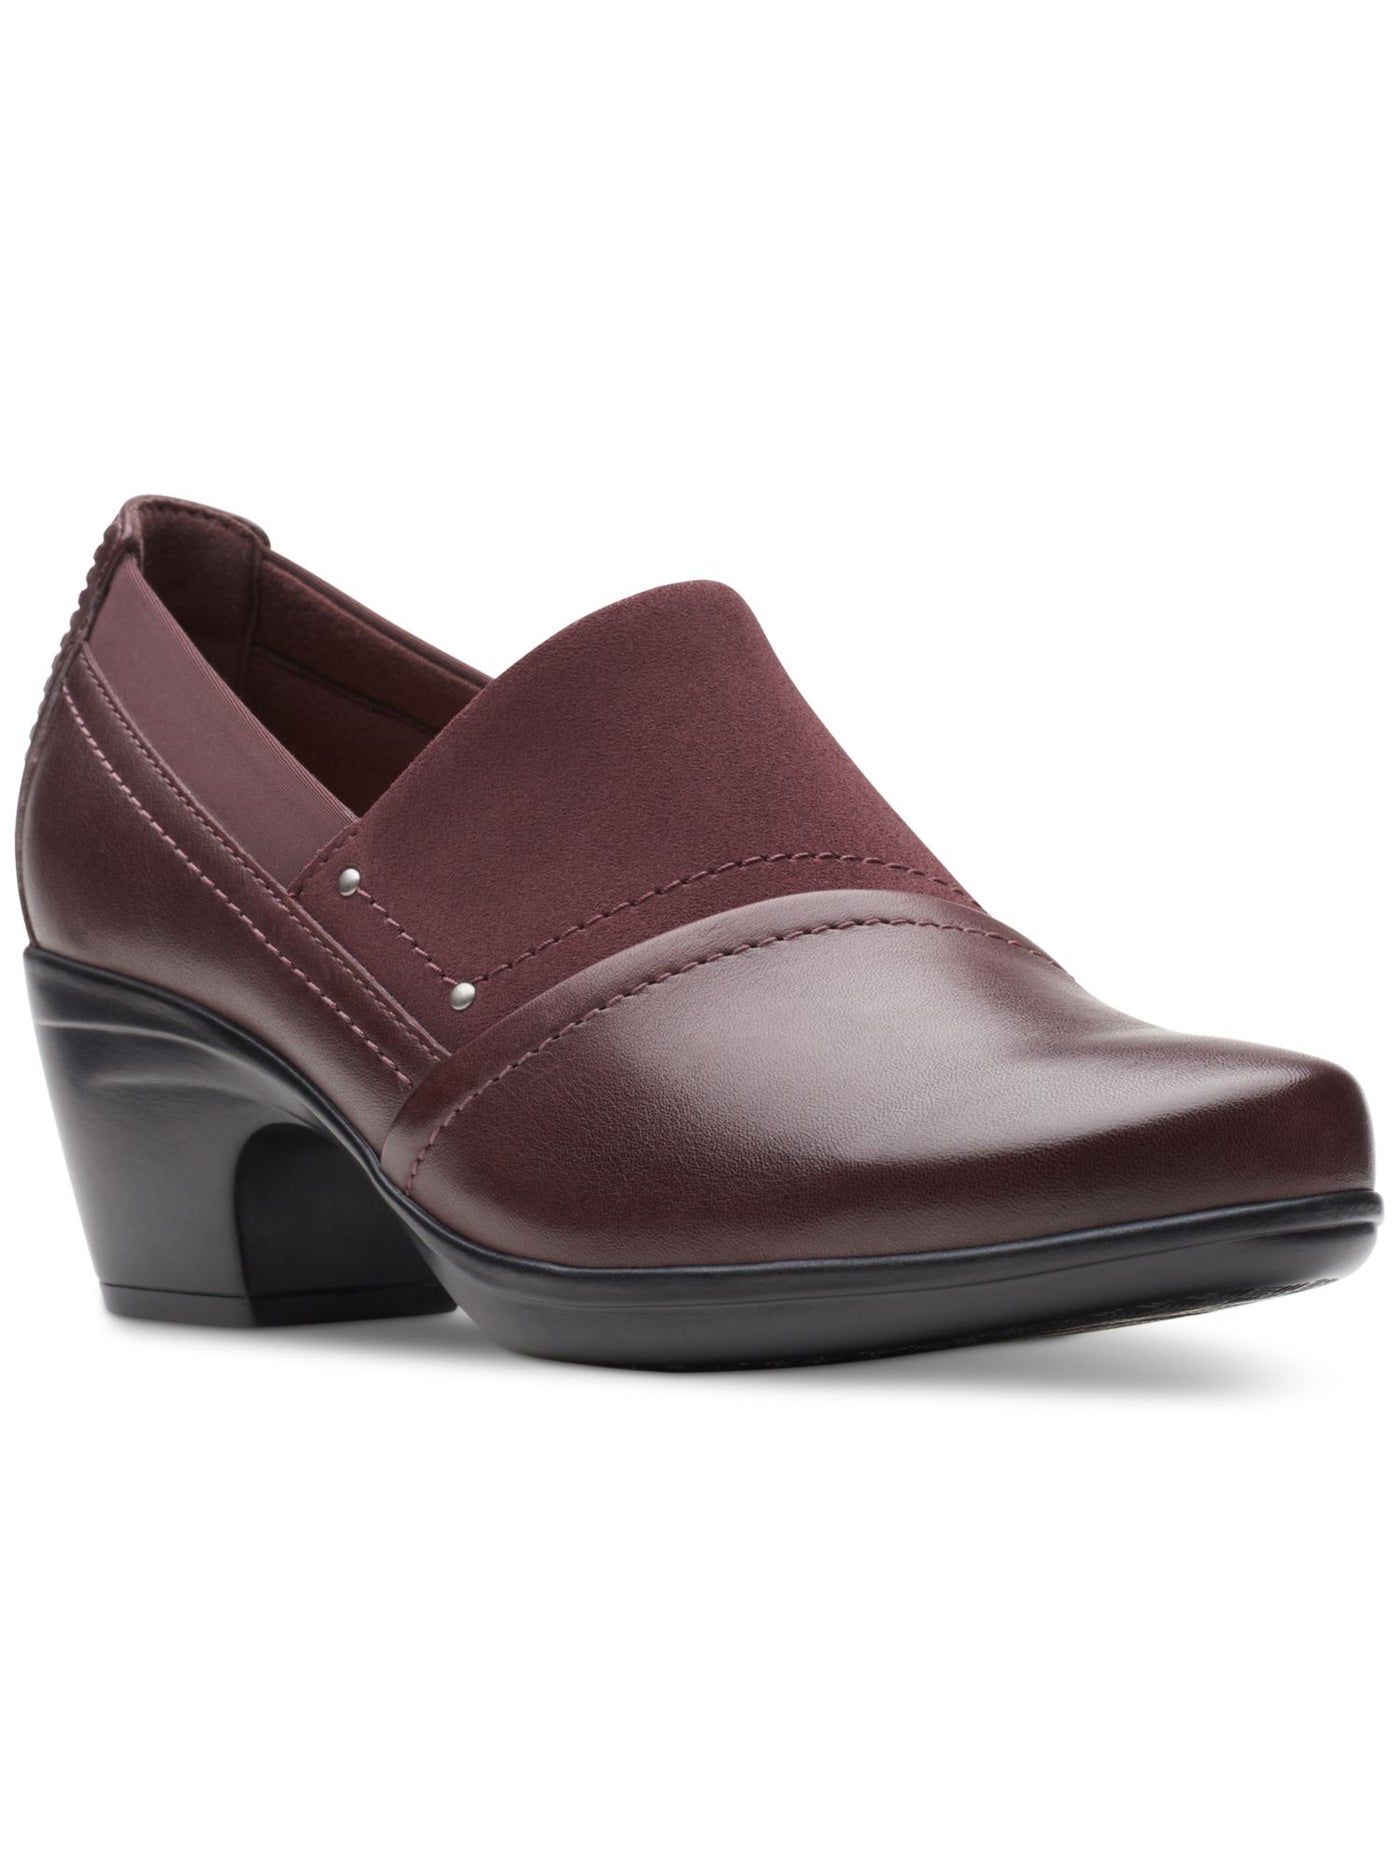 COLLECTION BY CLARKS Womens Burgundy Goring Padded Emily Round Toe Sculpted Heel Slip On Leather Heeled Loafers 6 M